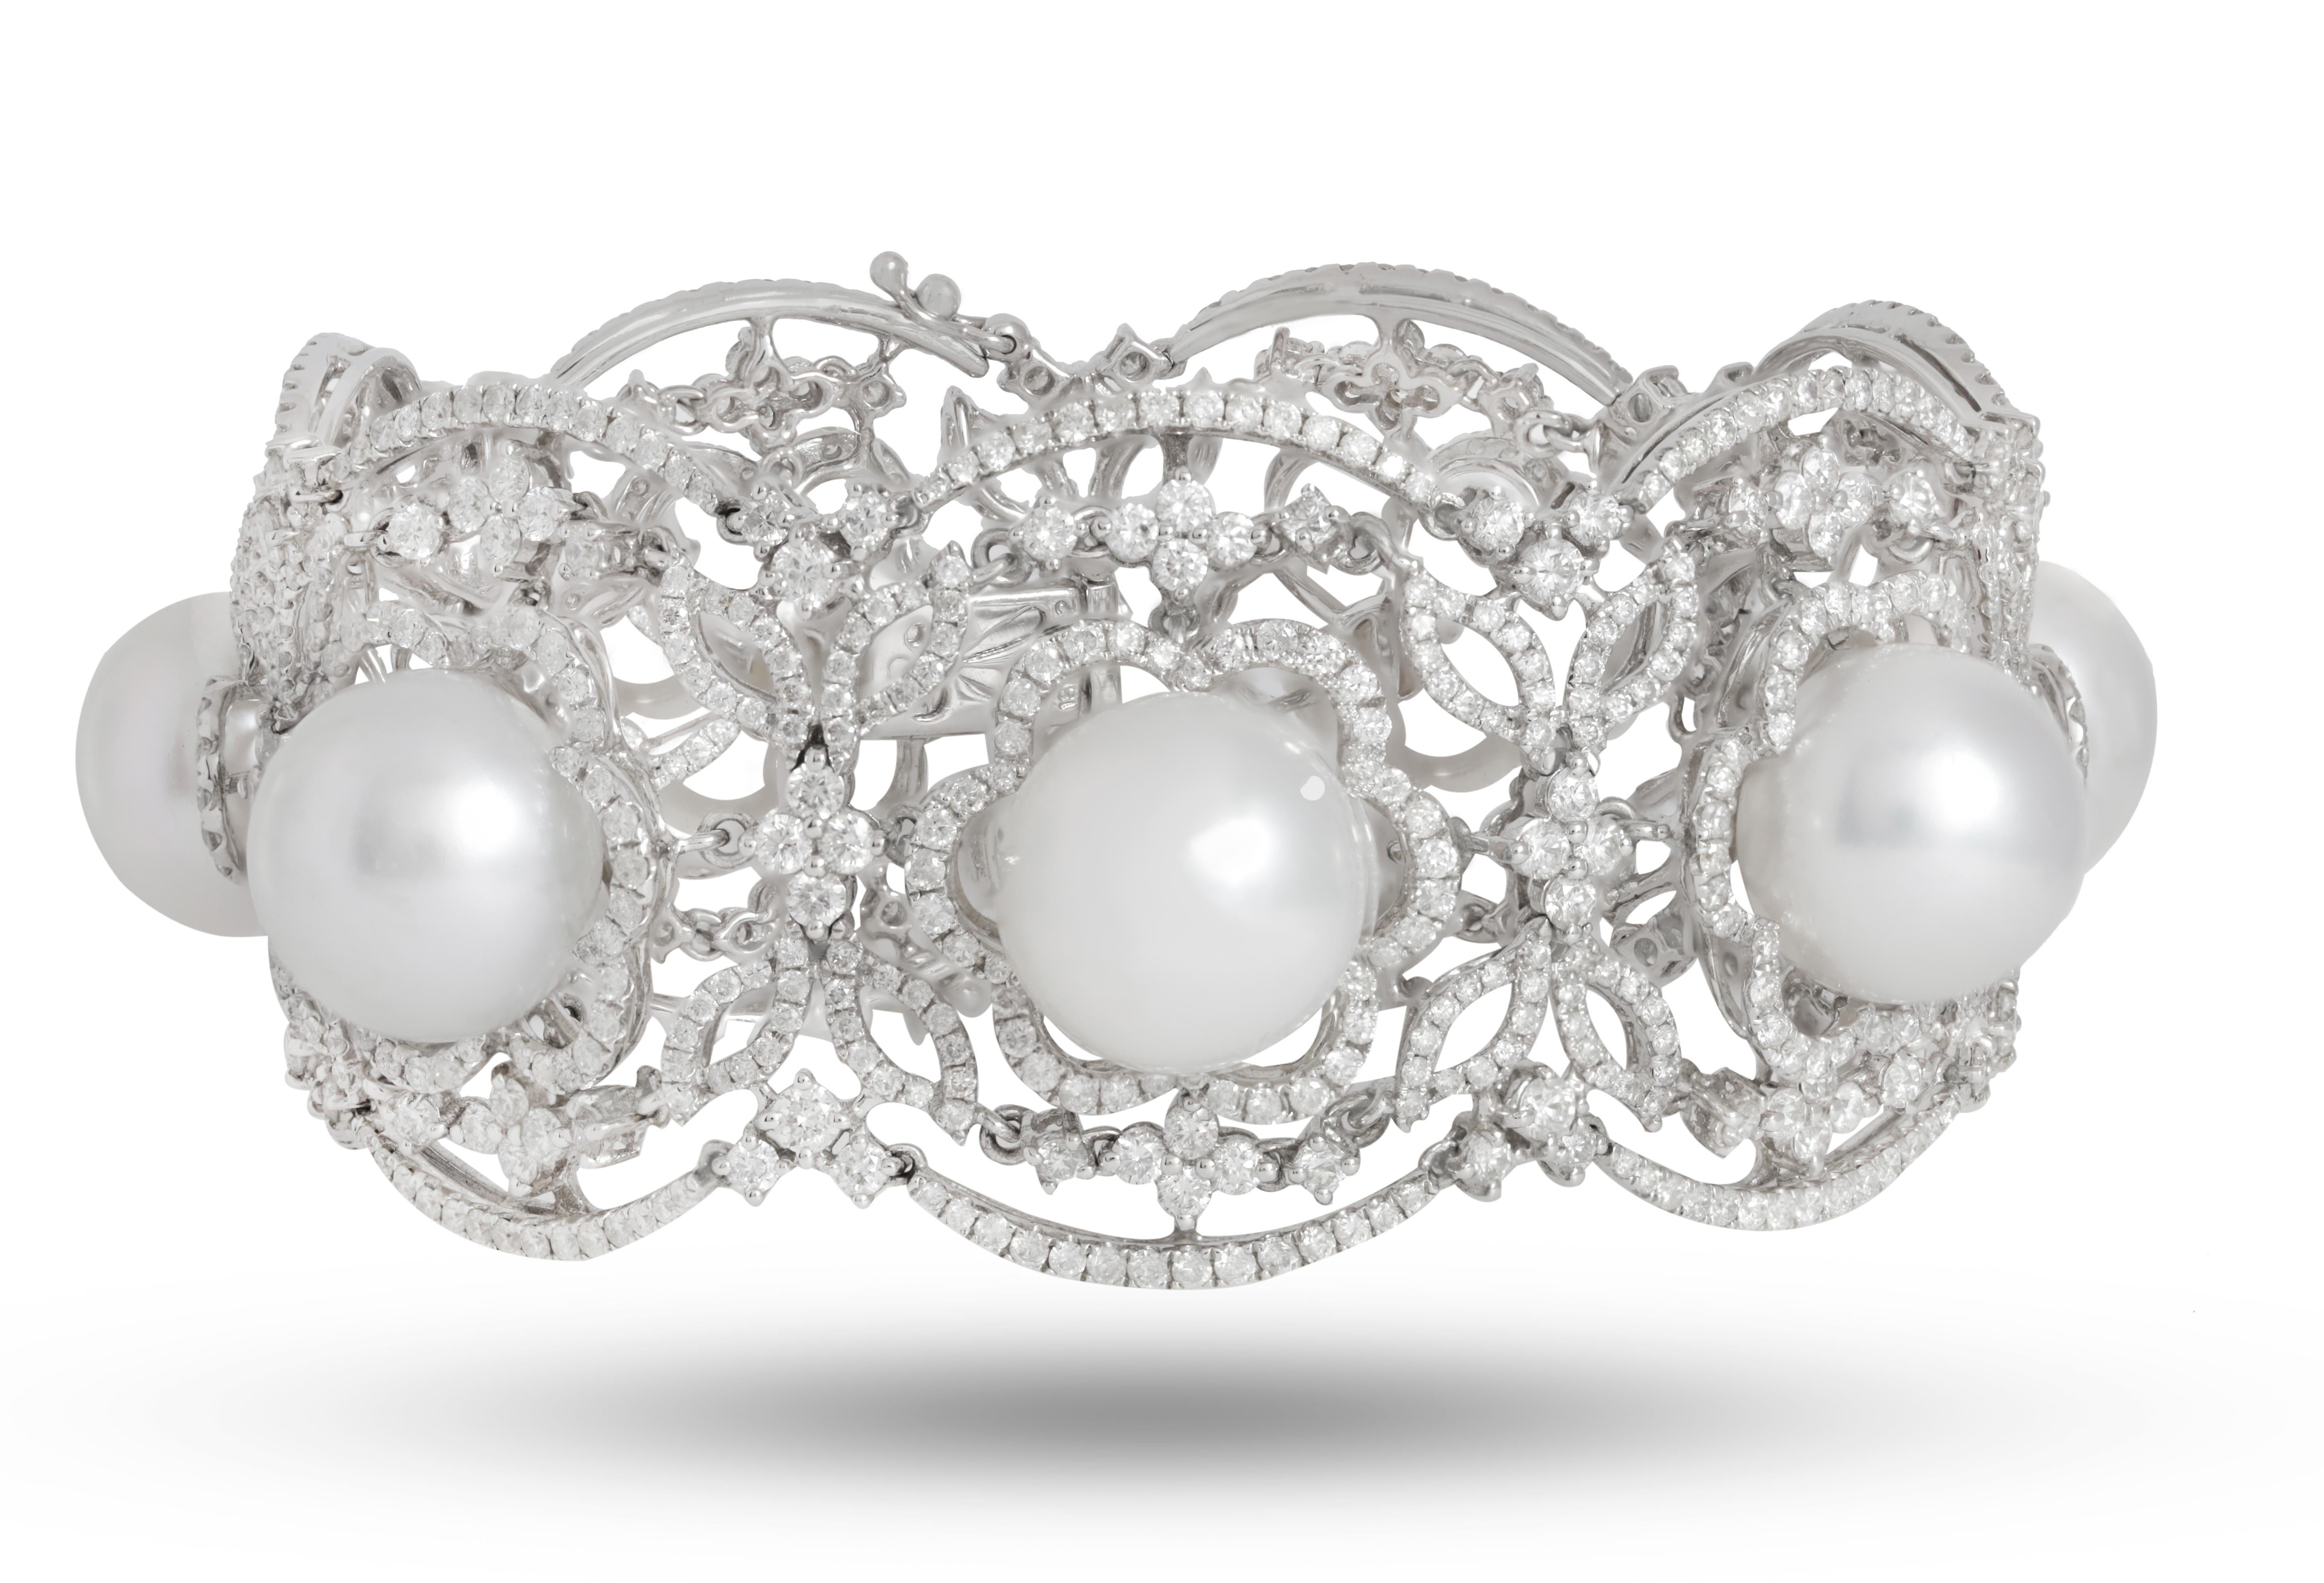 Modern Diana M. 18 kt white gold diamond and pearl fashion bracelet adorned with 13.5  For Sale